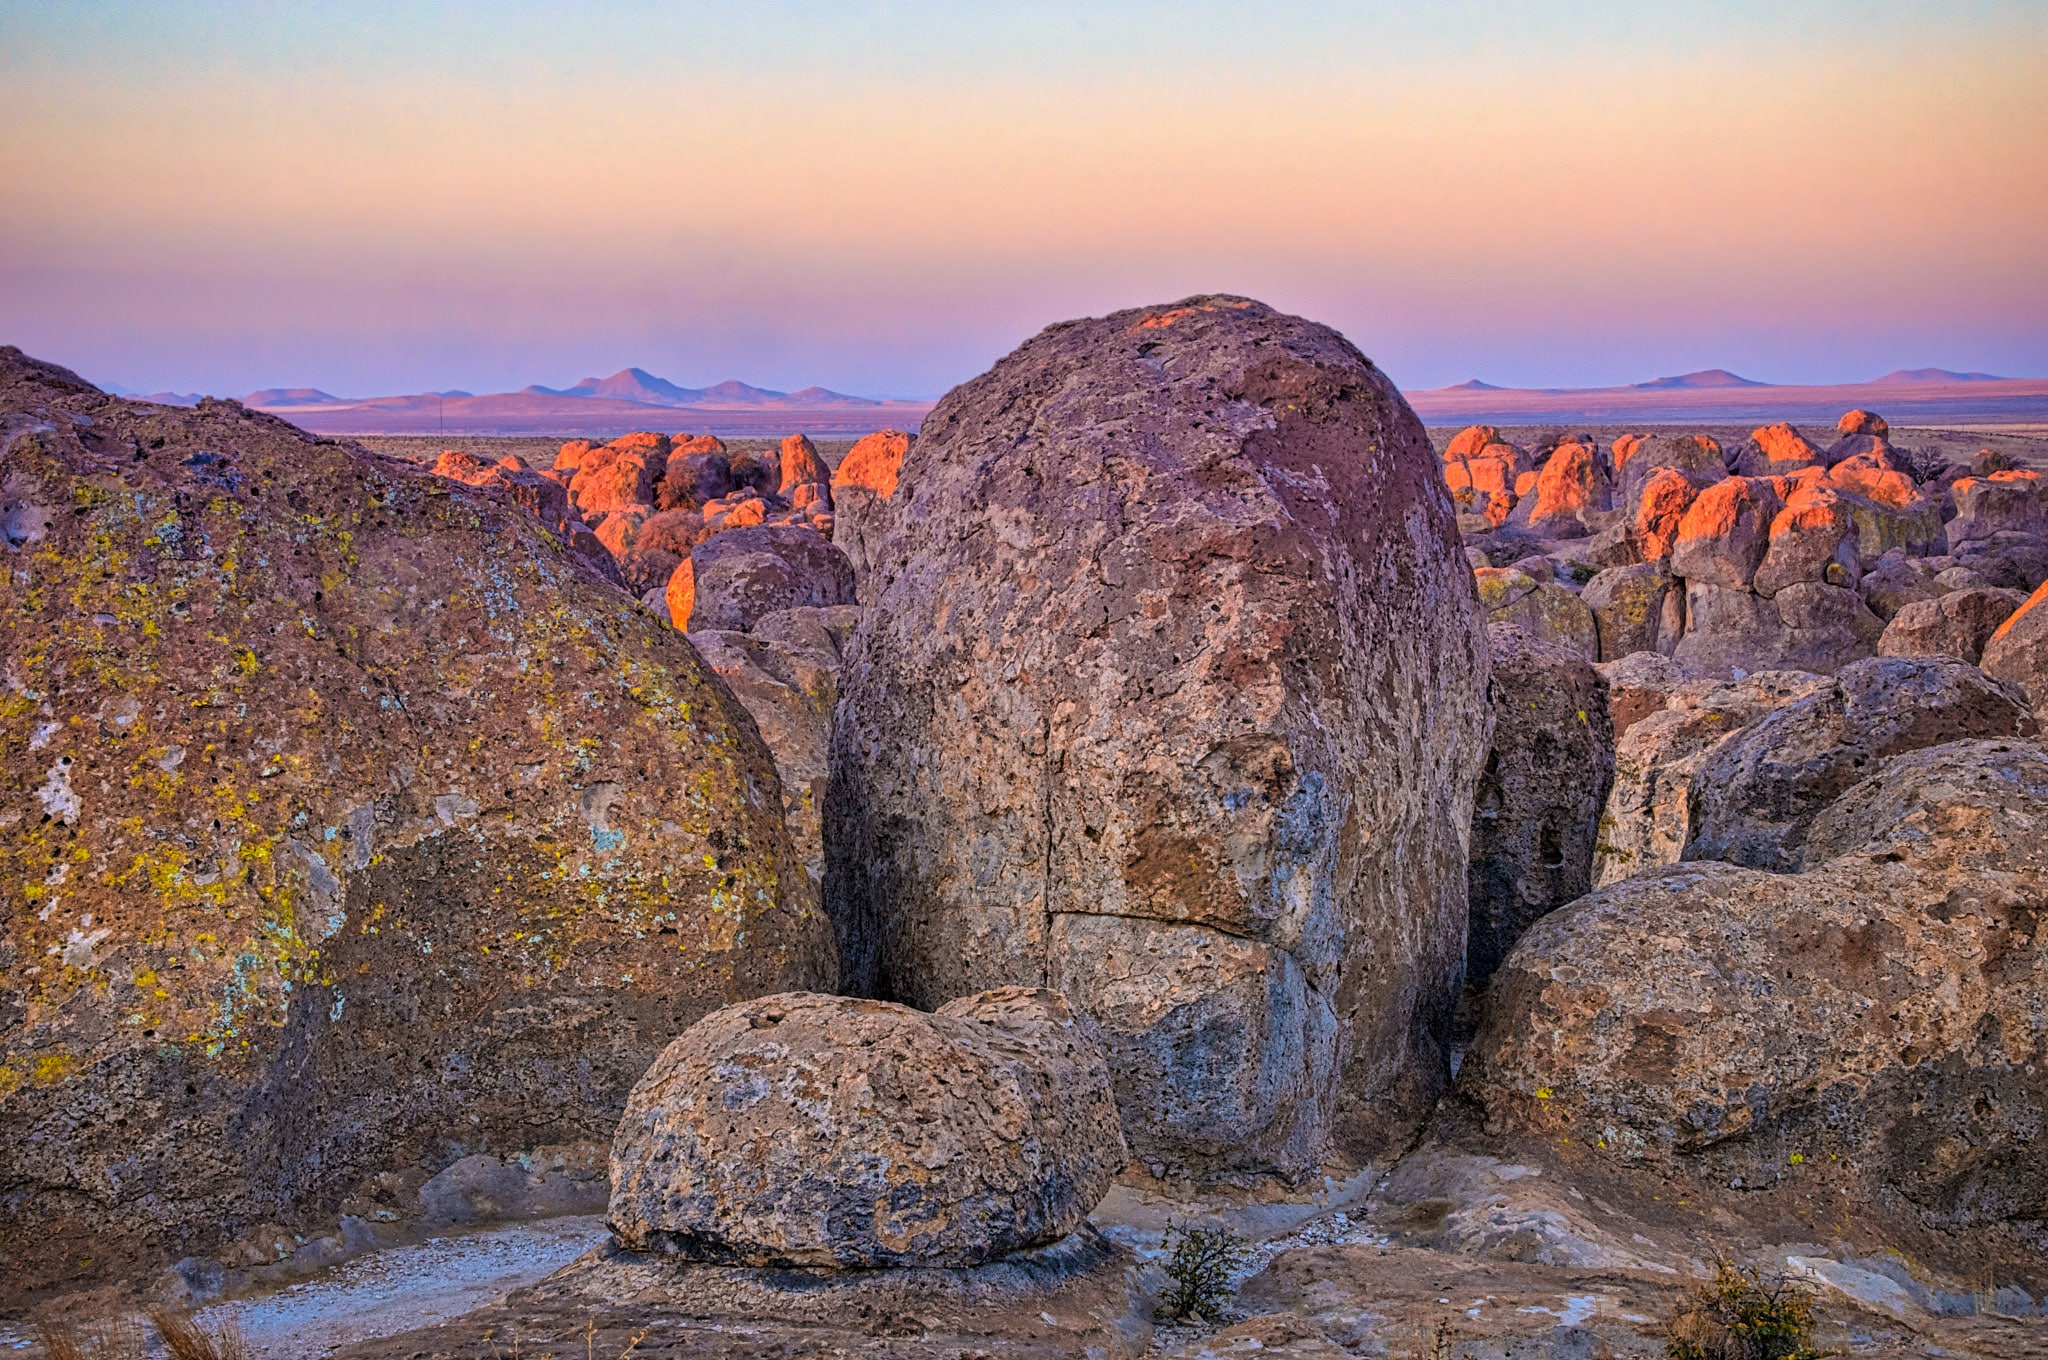 A dramatic sunset view taken through the eroded tuff pinnacles of City of Rocks State Park in New Mexico.